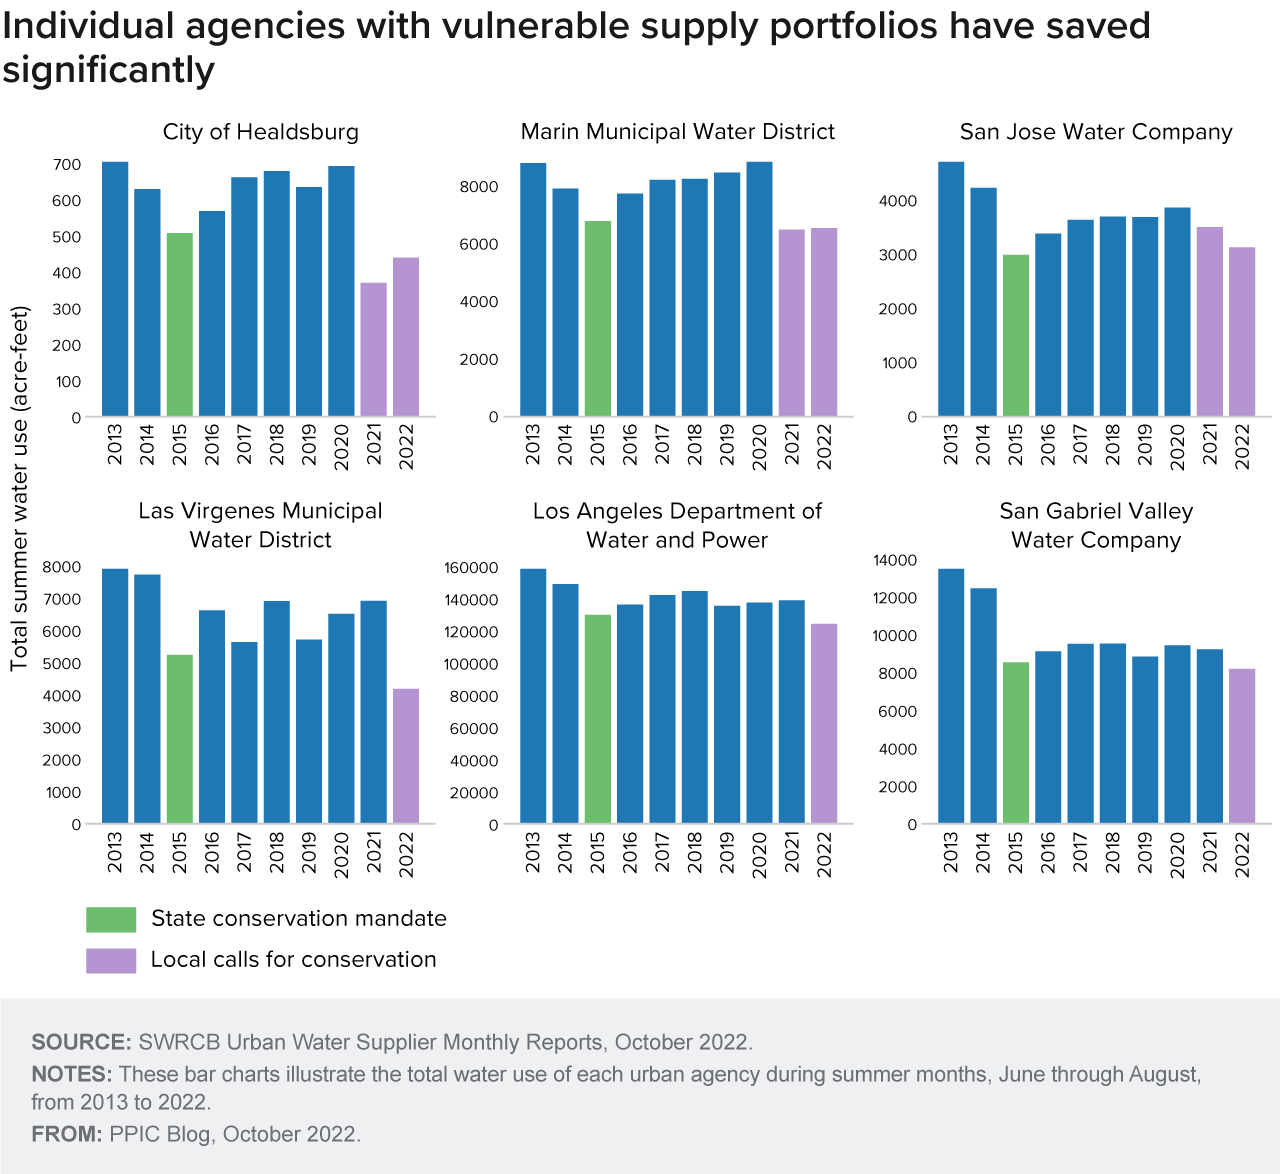 figure - Individual agencies with vulnerable supply portfolios have saved significantly